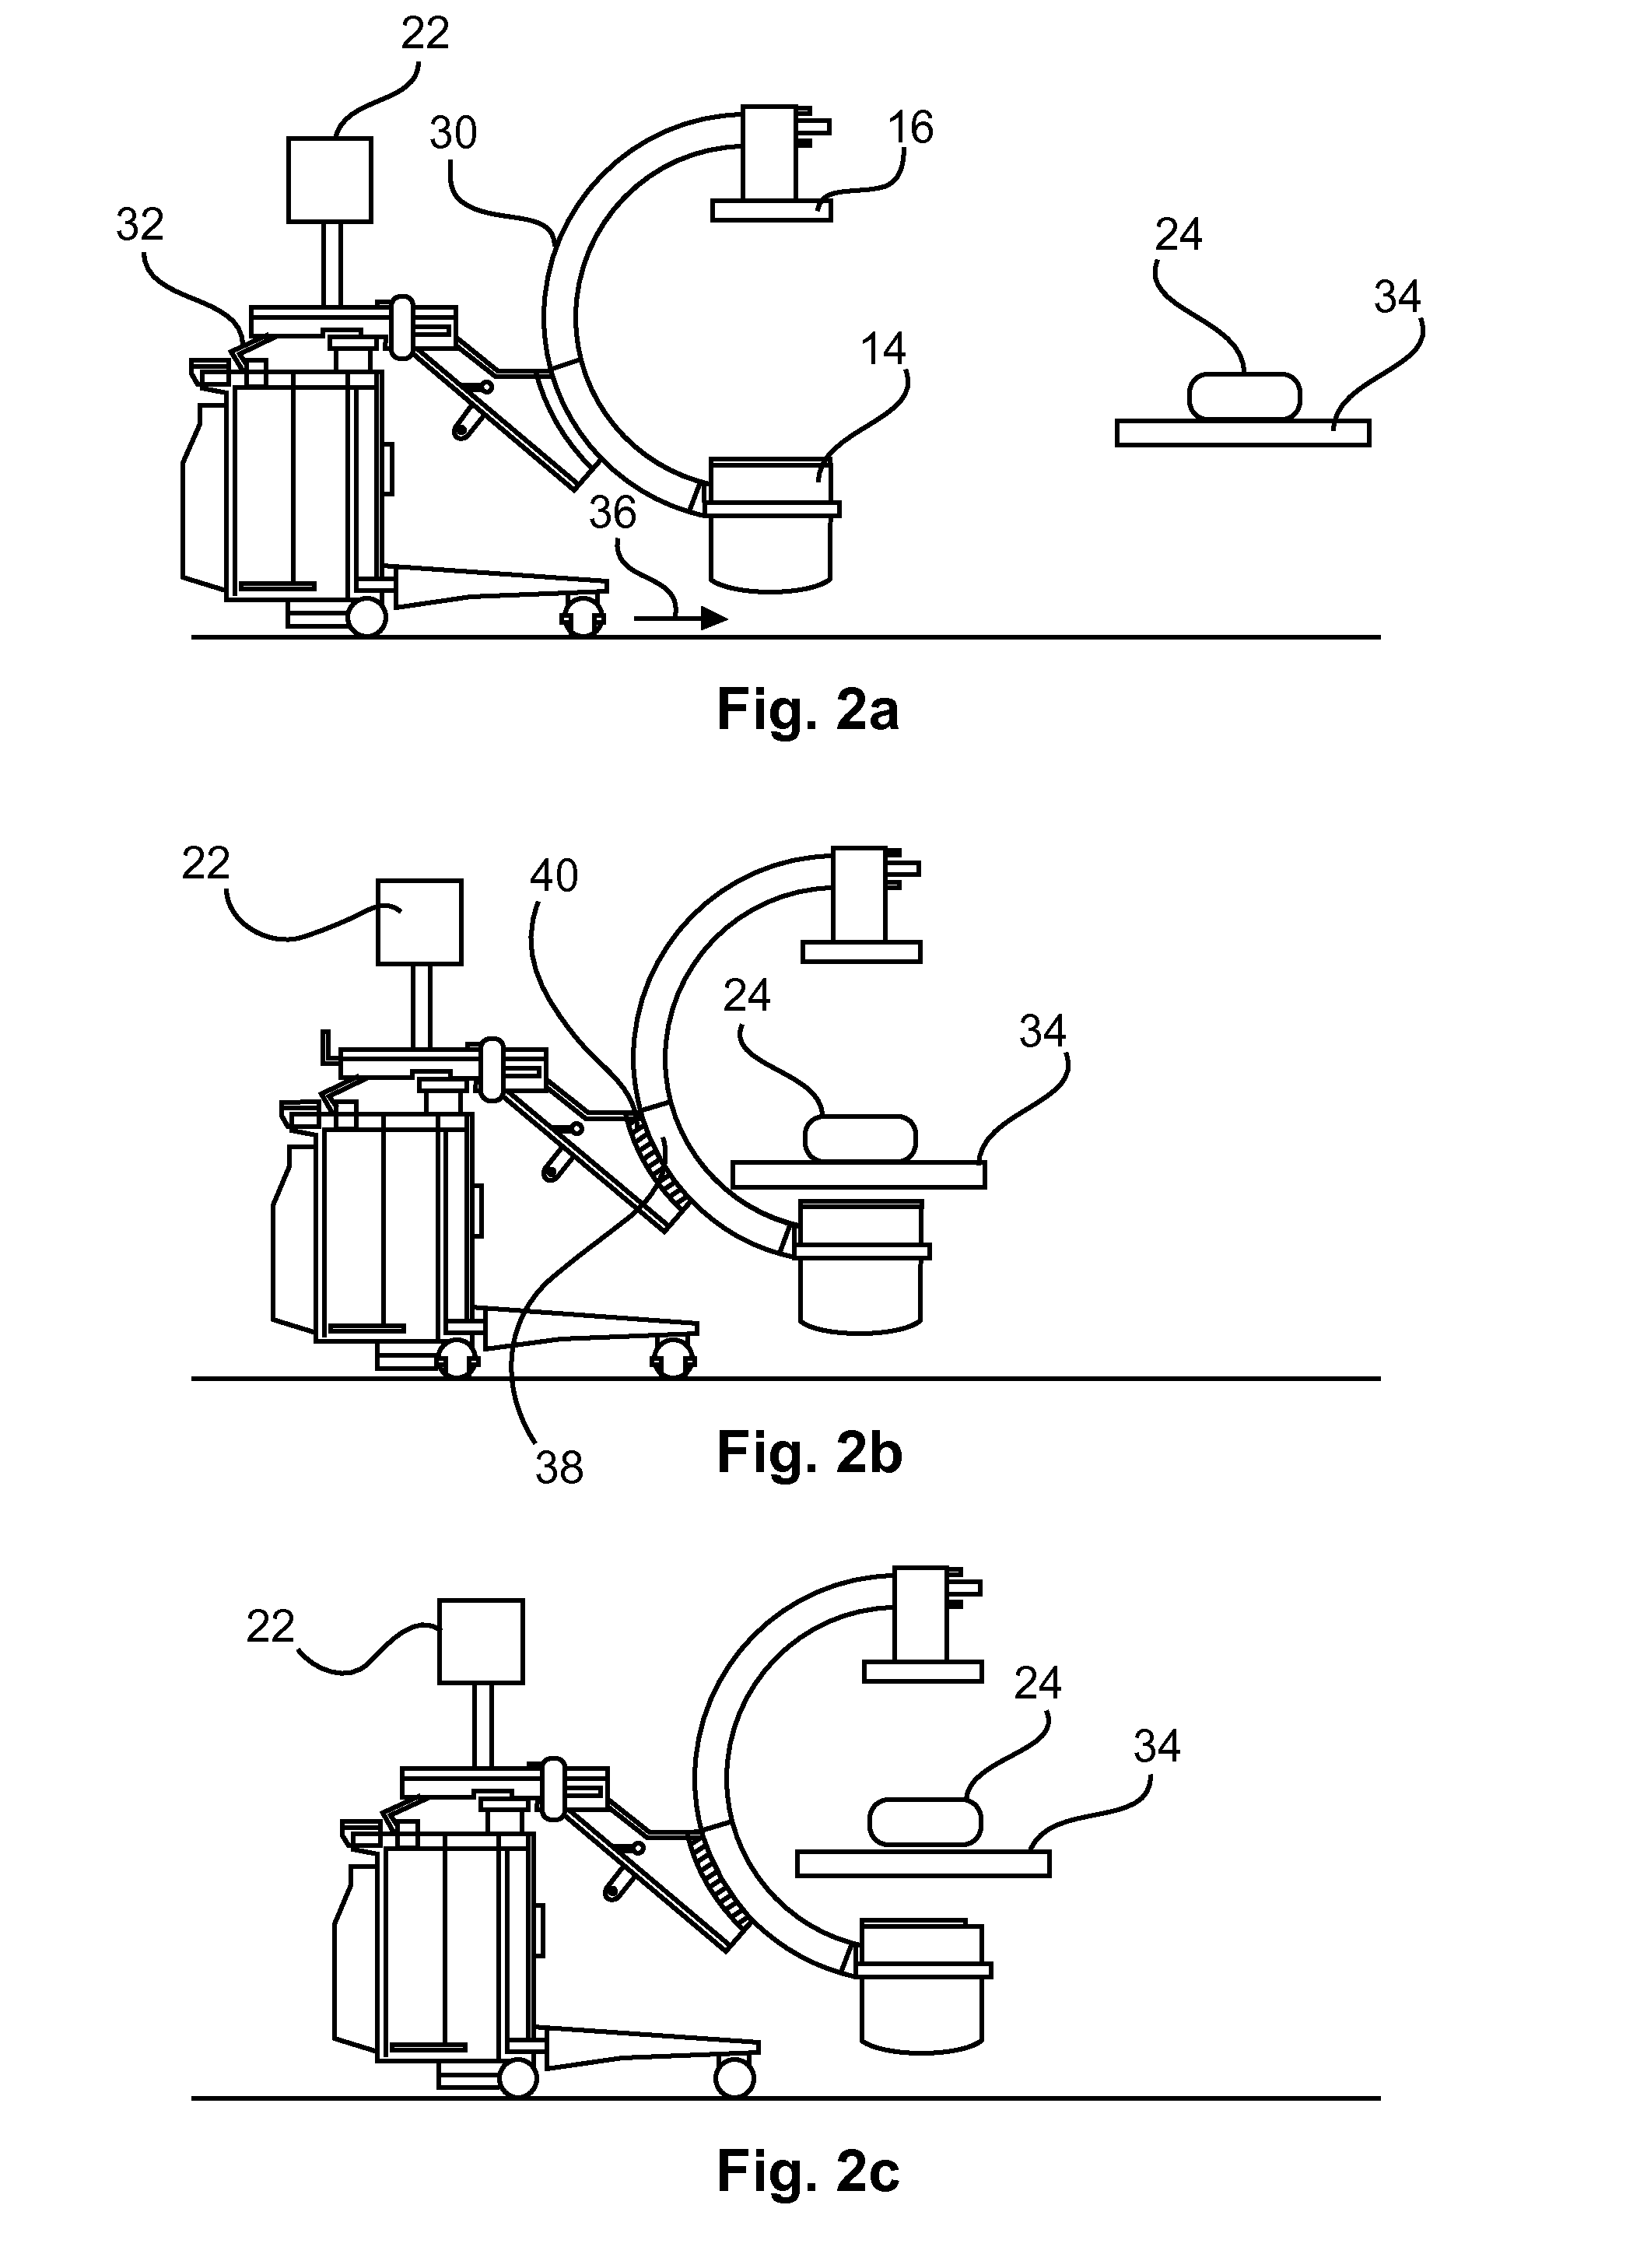 Camera-based visual adjustment of a movable x-ray imaging system